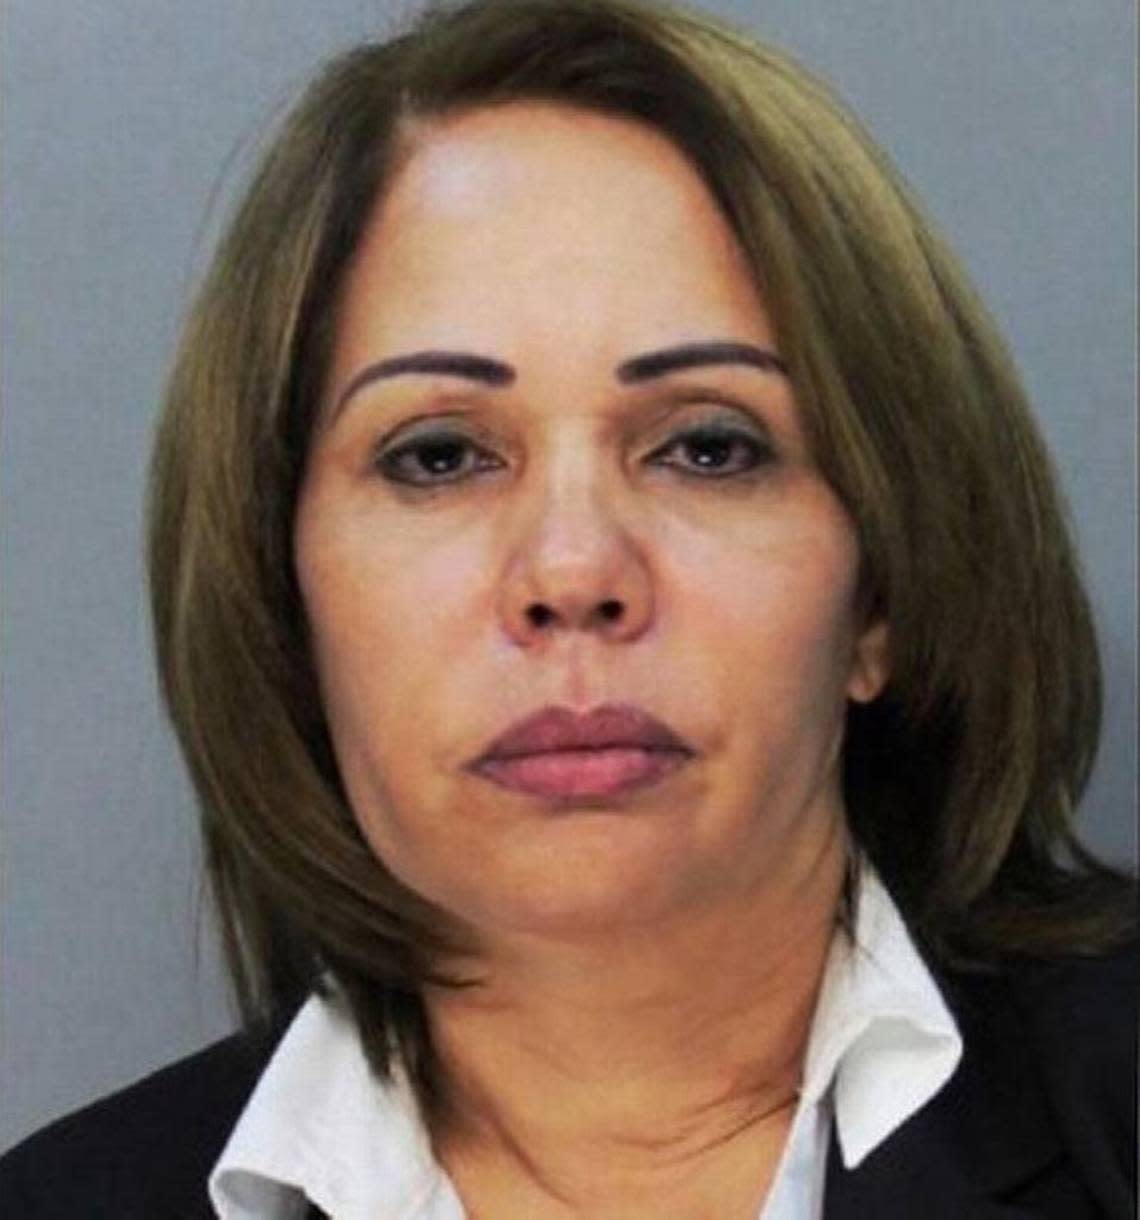 Fior Pichardo de Veloz was misgendered and transferred to an all-male jail after an arrest in Miami. (Photo: Miami-Dade Corrections)